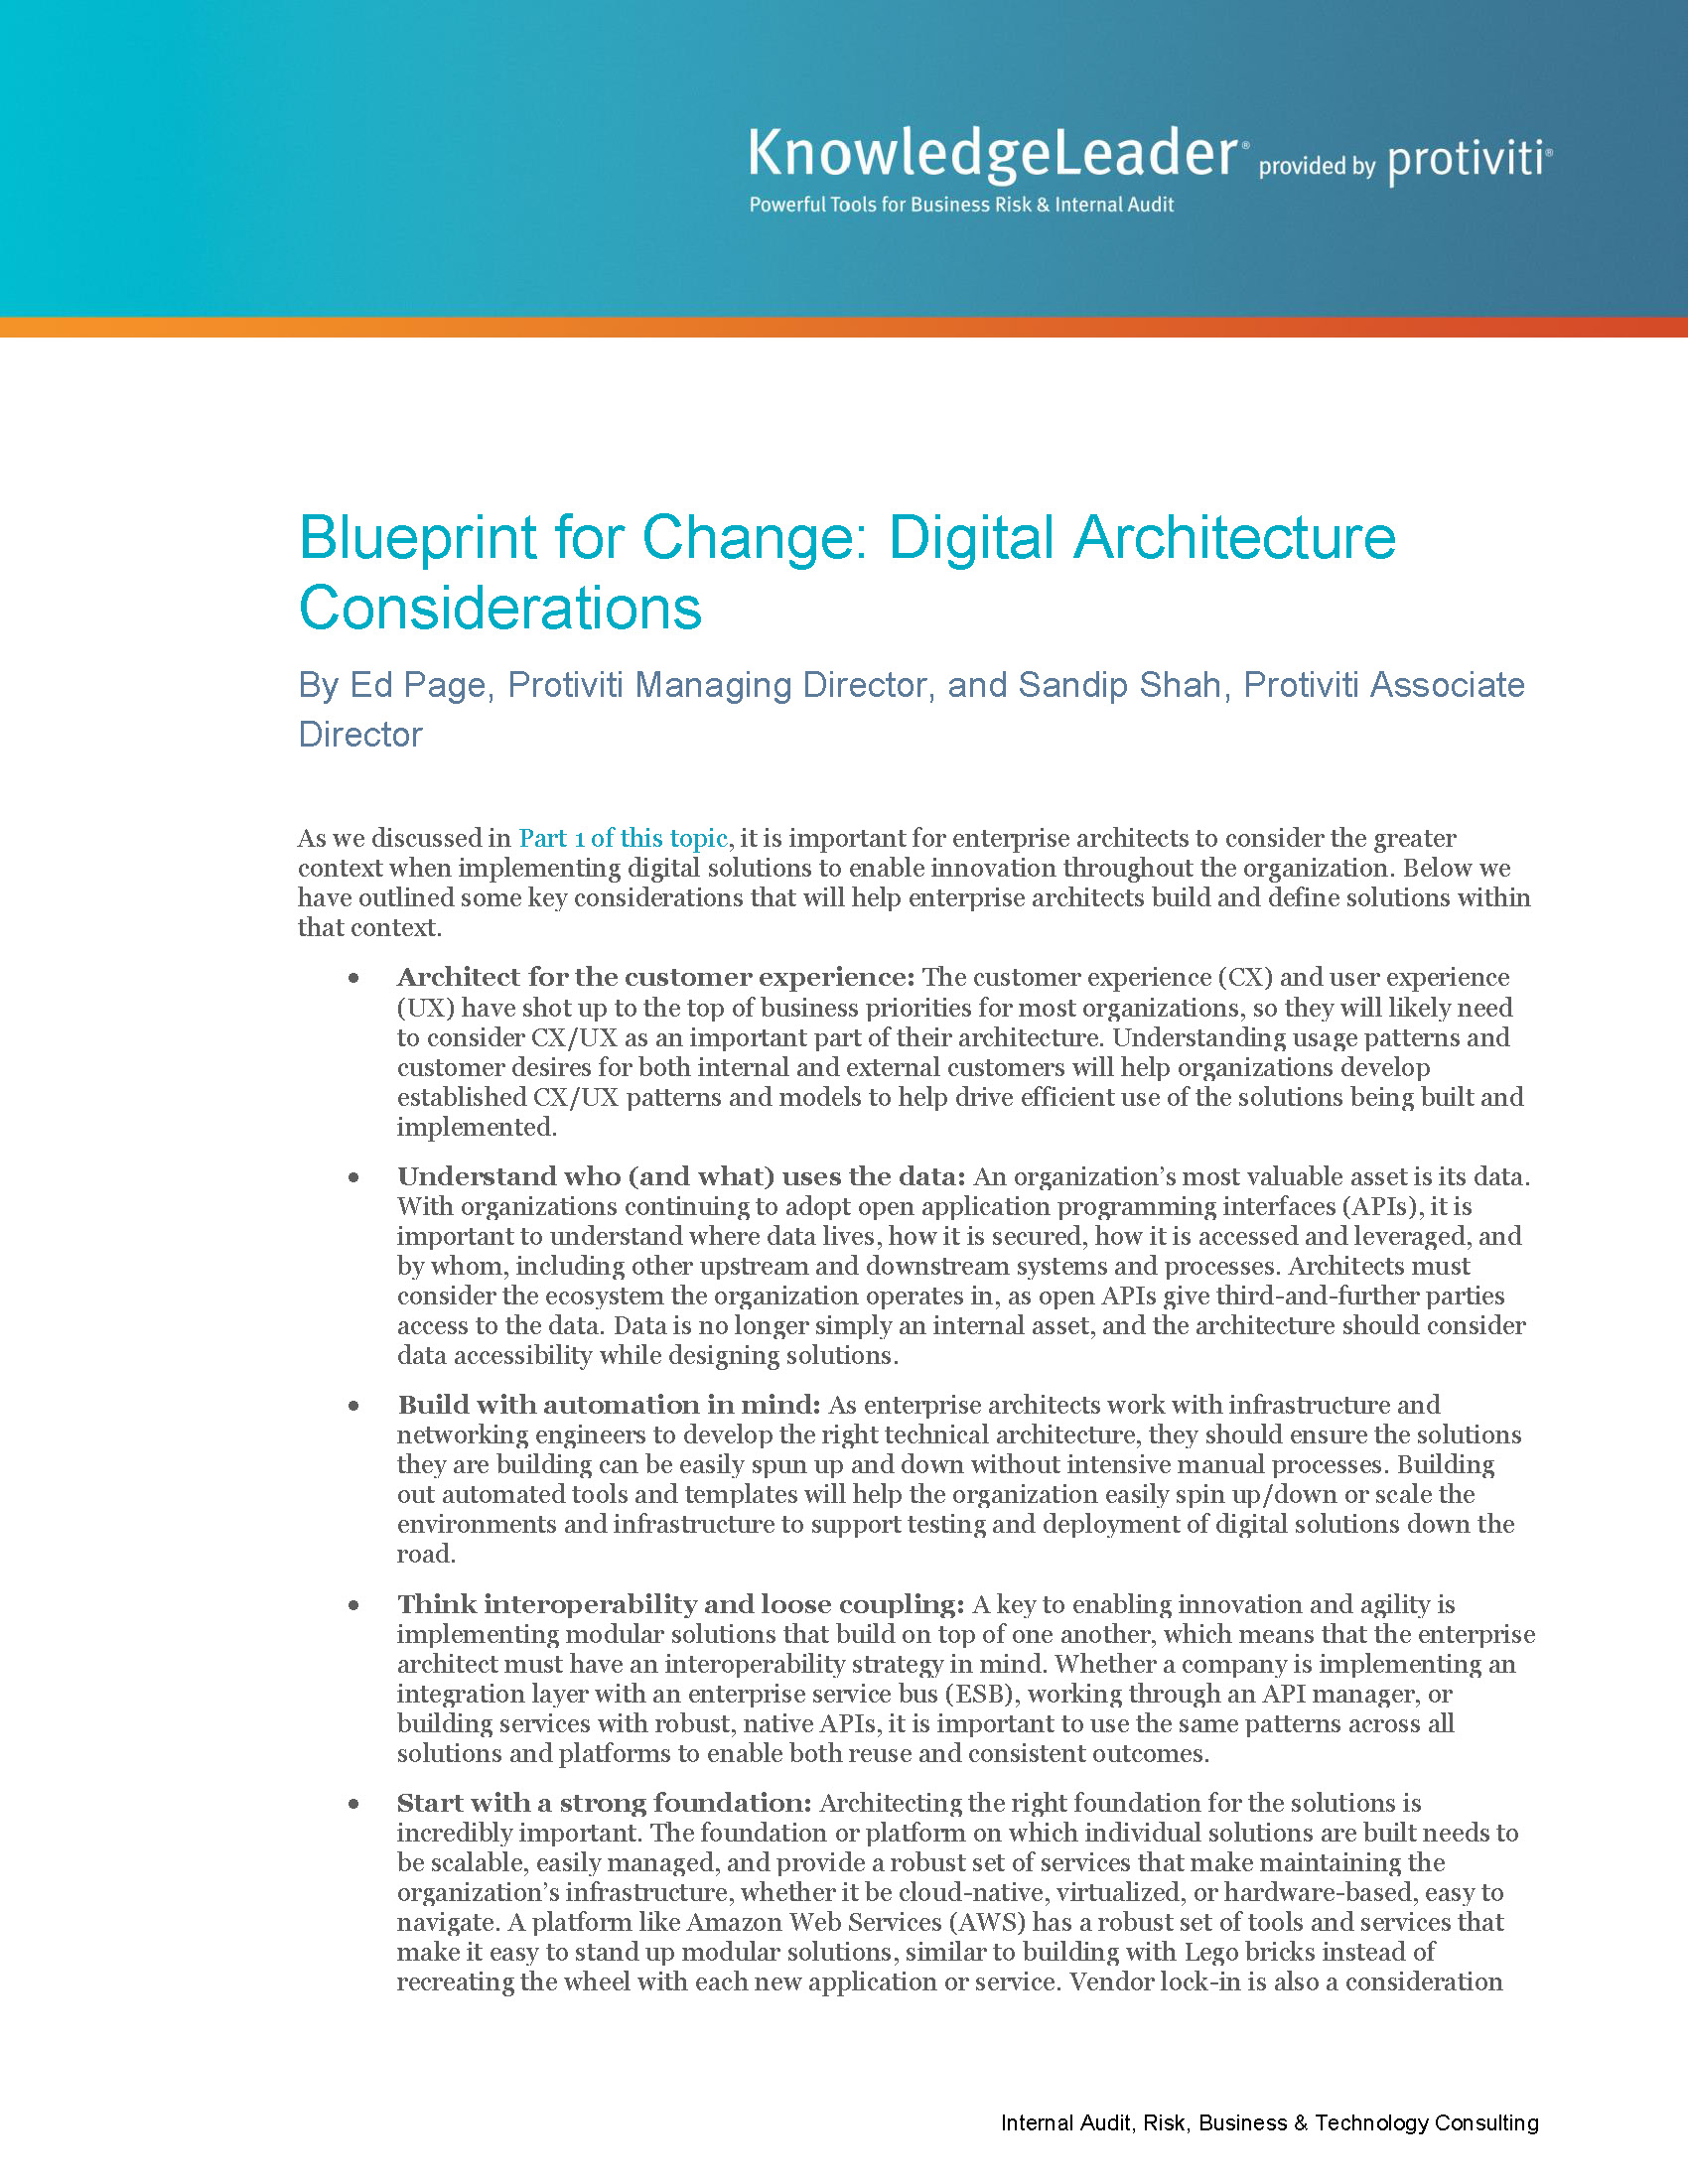 Screenshot of the first page of Blueprint for Change Digital Architecture Considerations